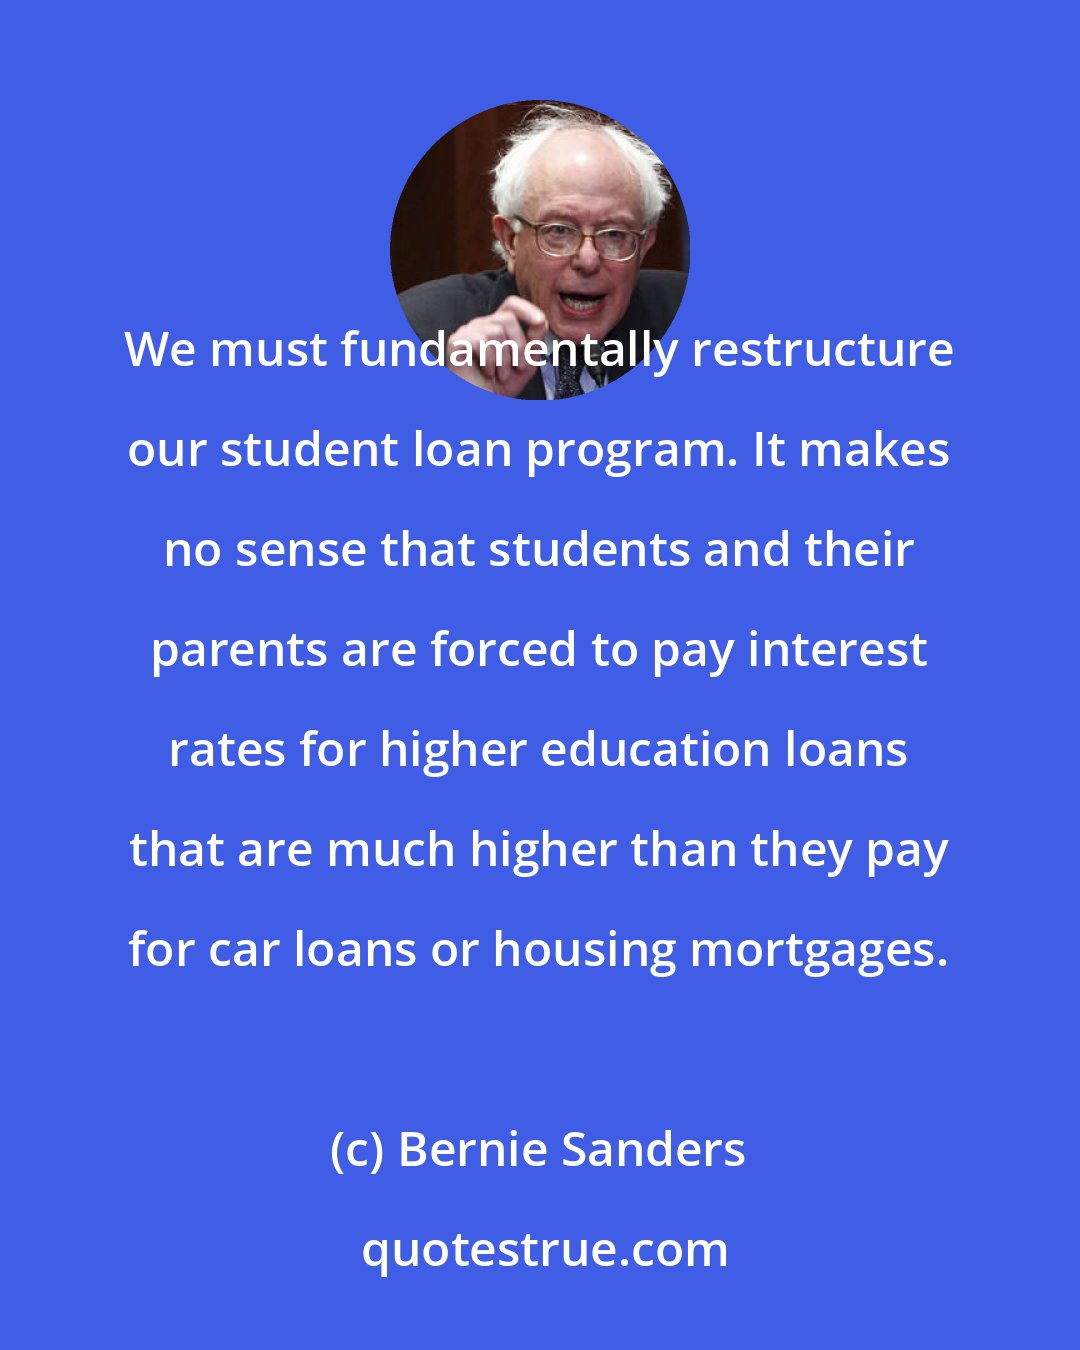 Bernie Sanders: We must fundamentally restructure our student loan program. It makes no sense that students and their parents are forced to pay interest rates for higher education loans that are much higher than they pay for car loans or housing mortgages.